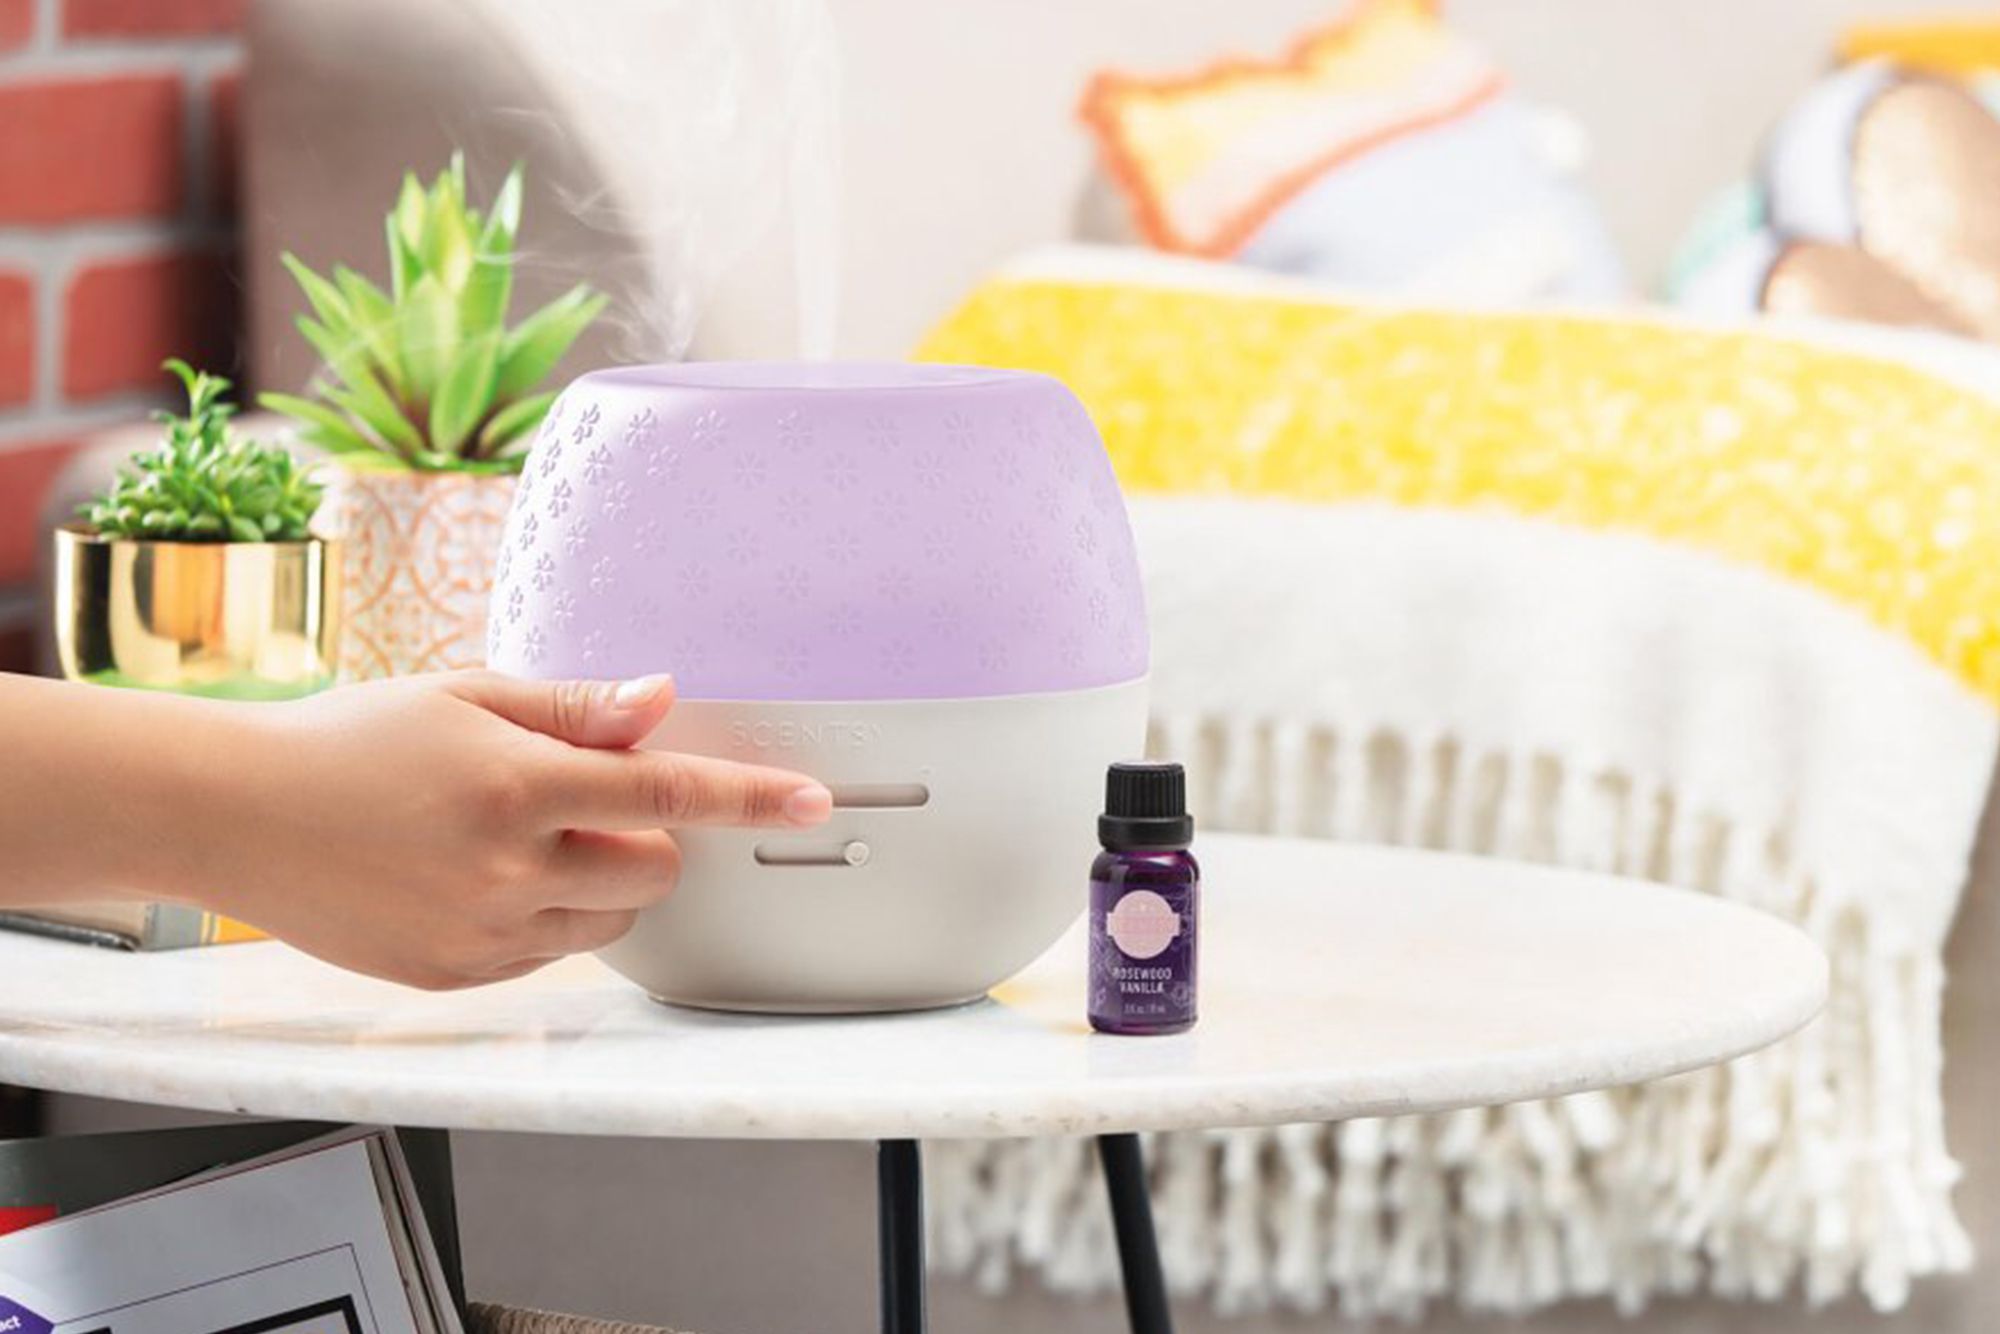 How to mix Scentsy Oils